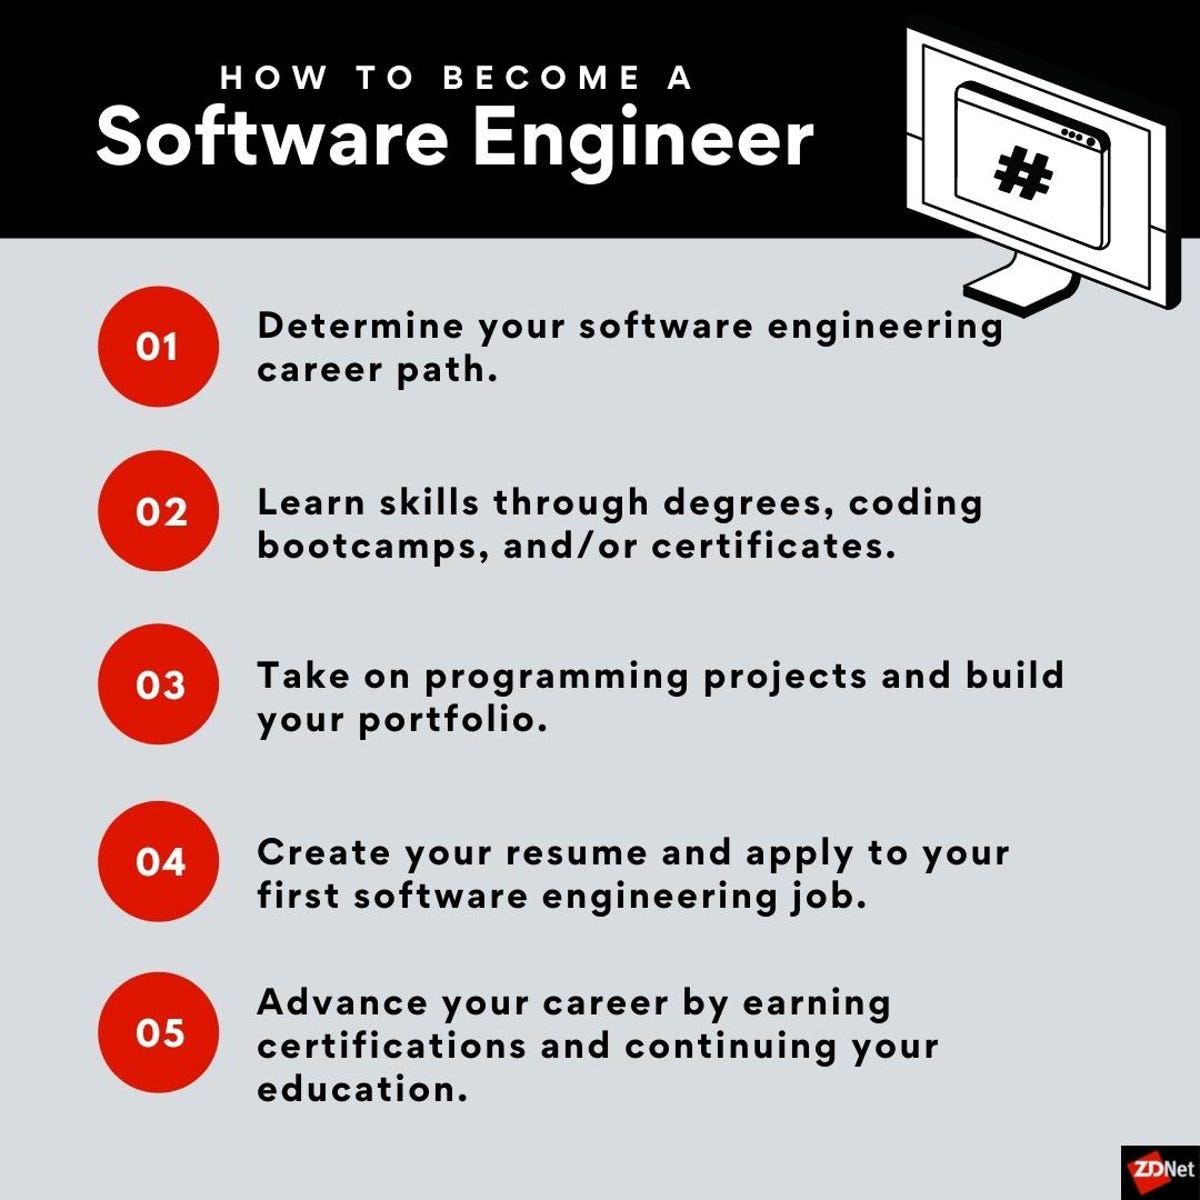 How To Become A Software Engineer: A Complete Guide | Zdnet